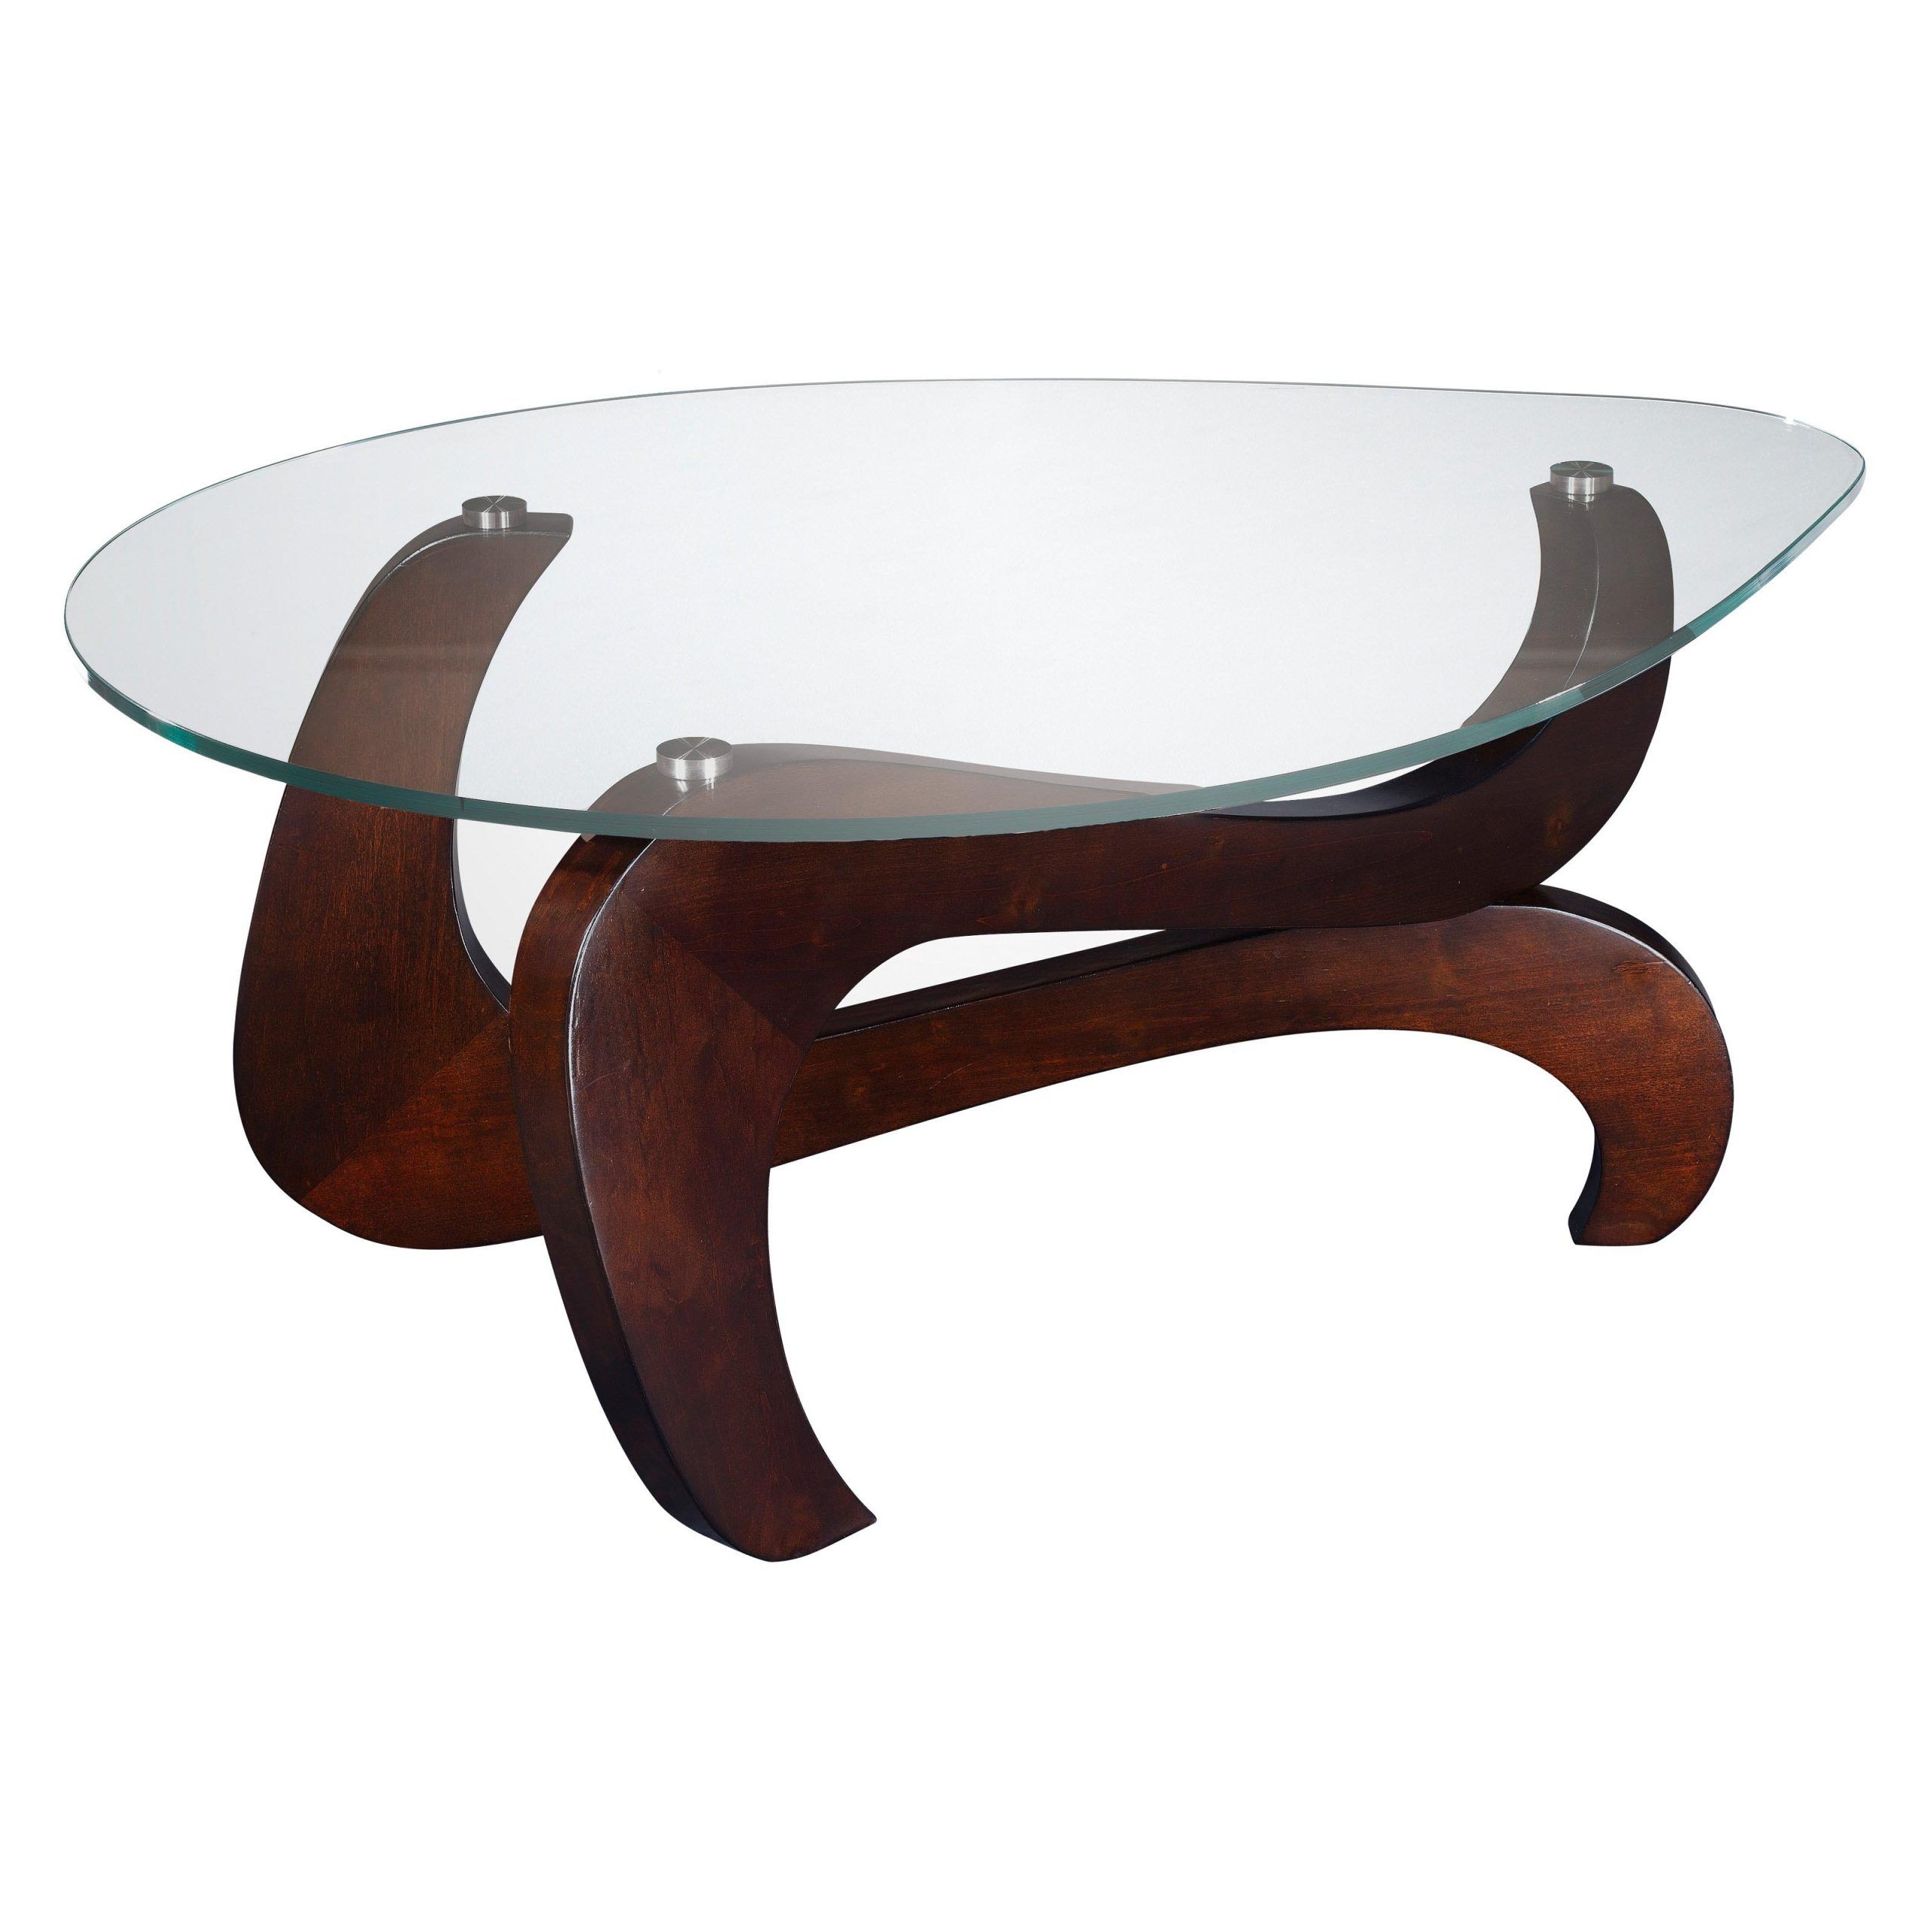 Wood Base Glass Top Coffee Table Intended For Wood Tempered Glass Top Coffee Tables (View 18 of 20)